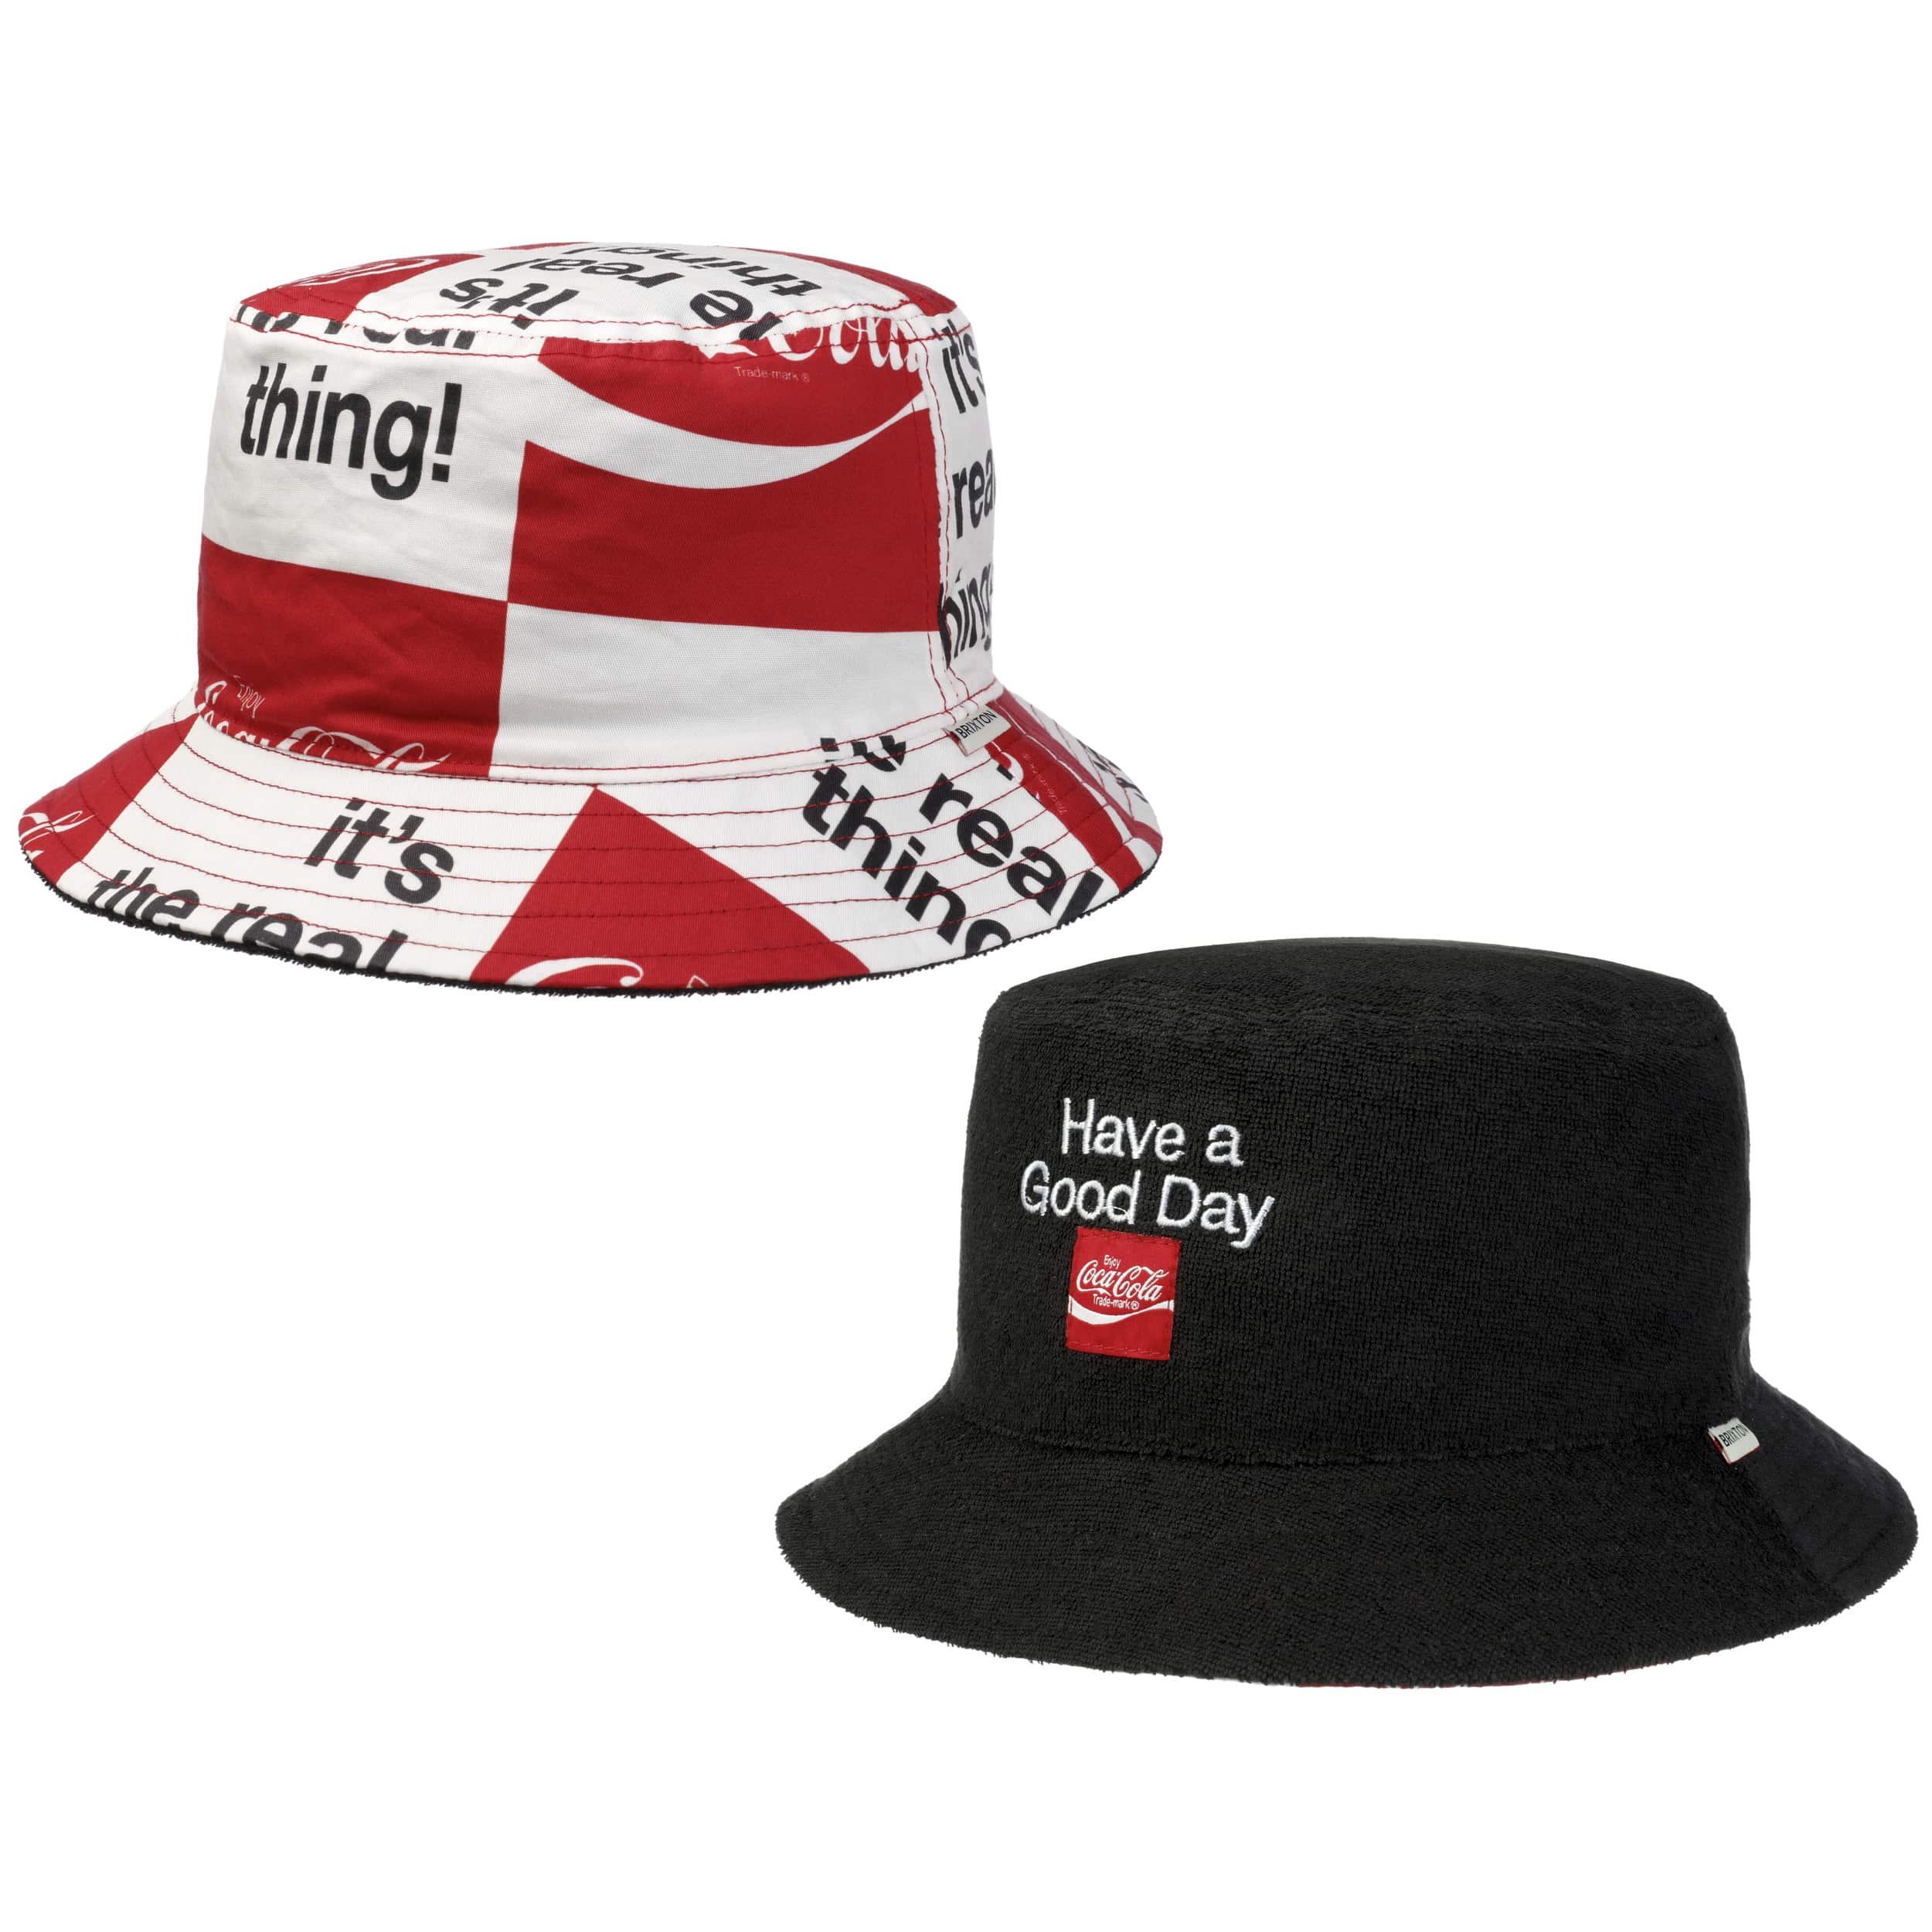 62,95 Coca-Cola Hat Good Reversible by Day € - Brixton